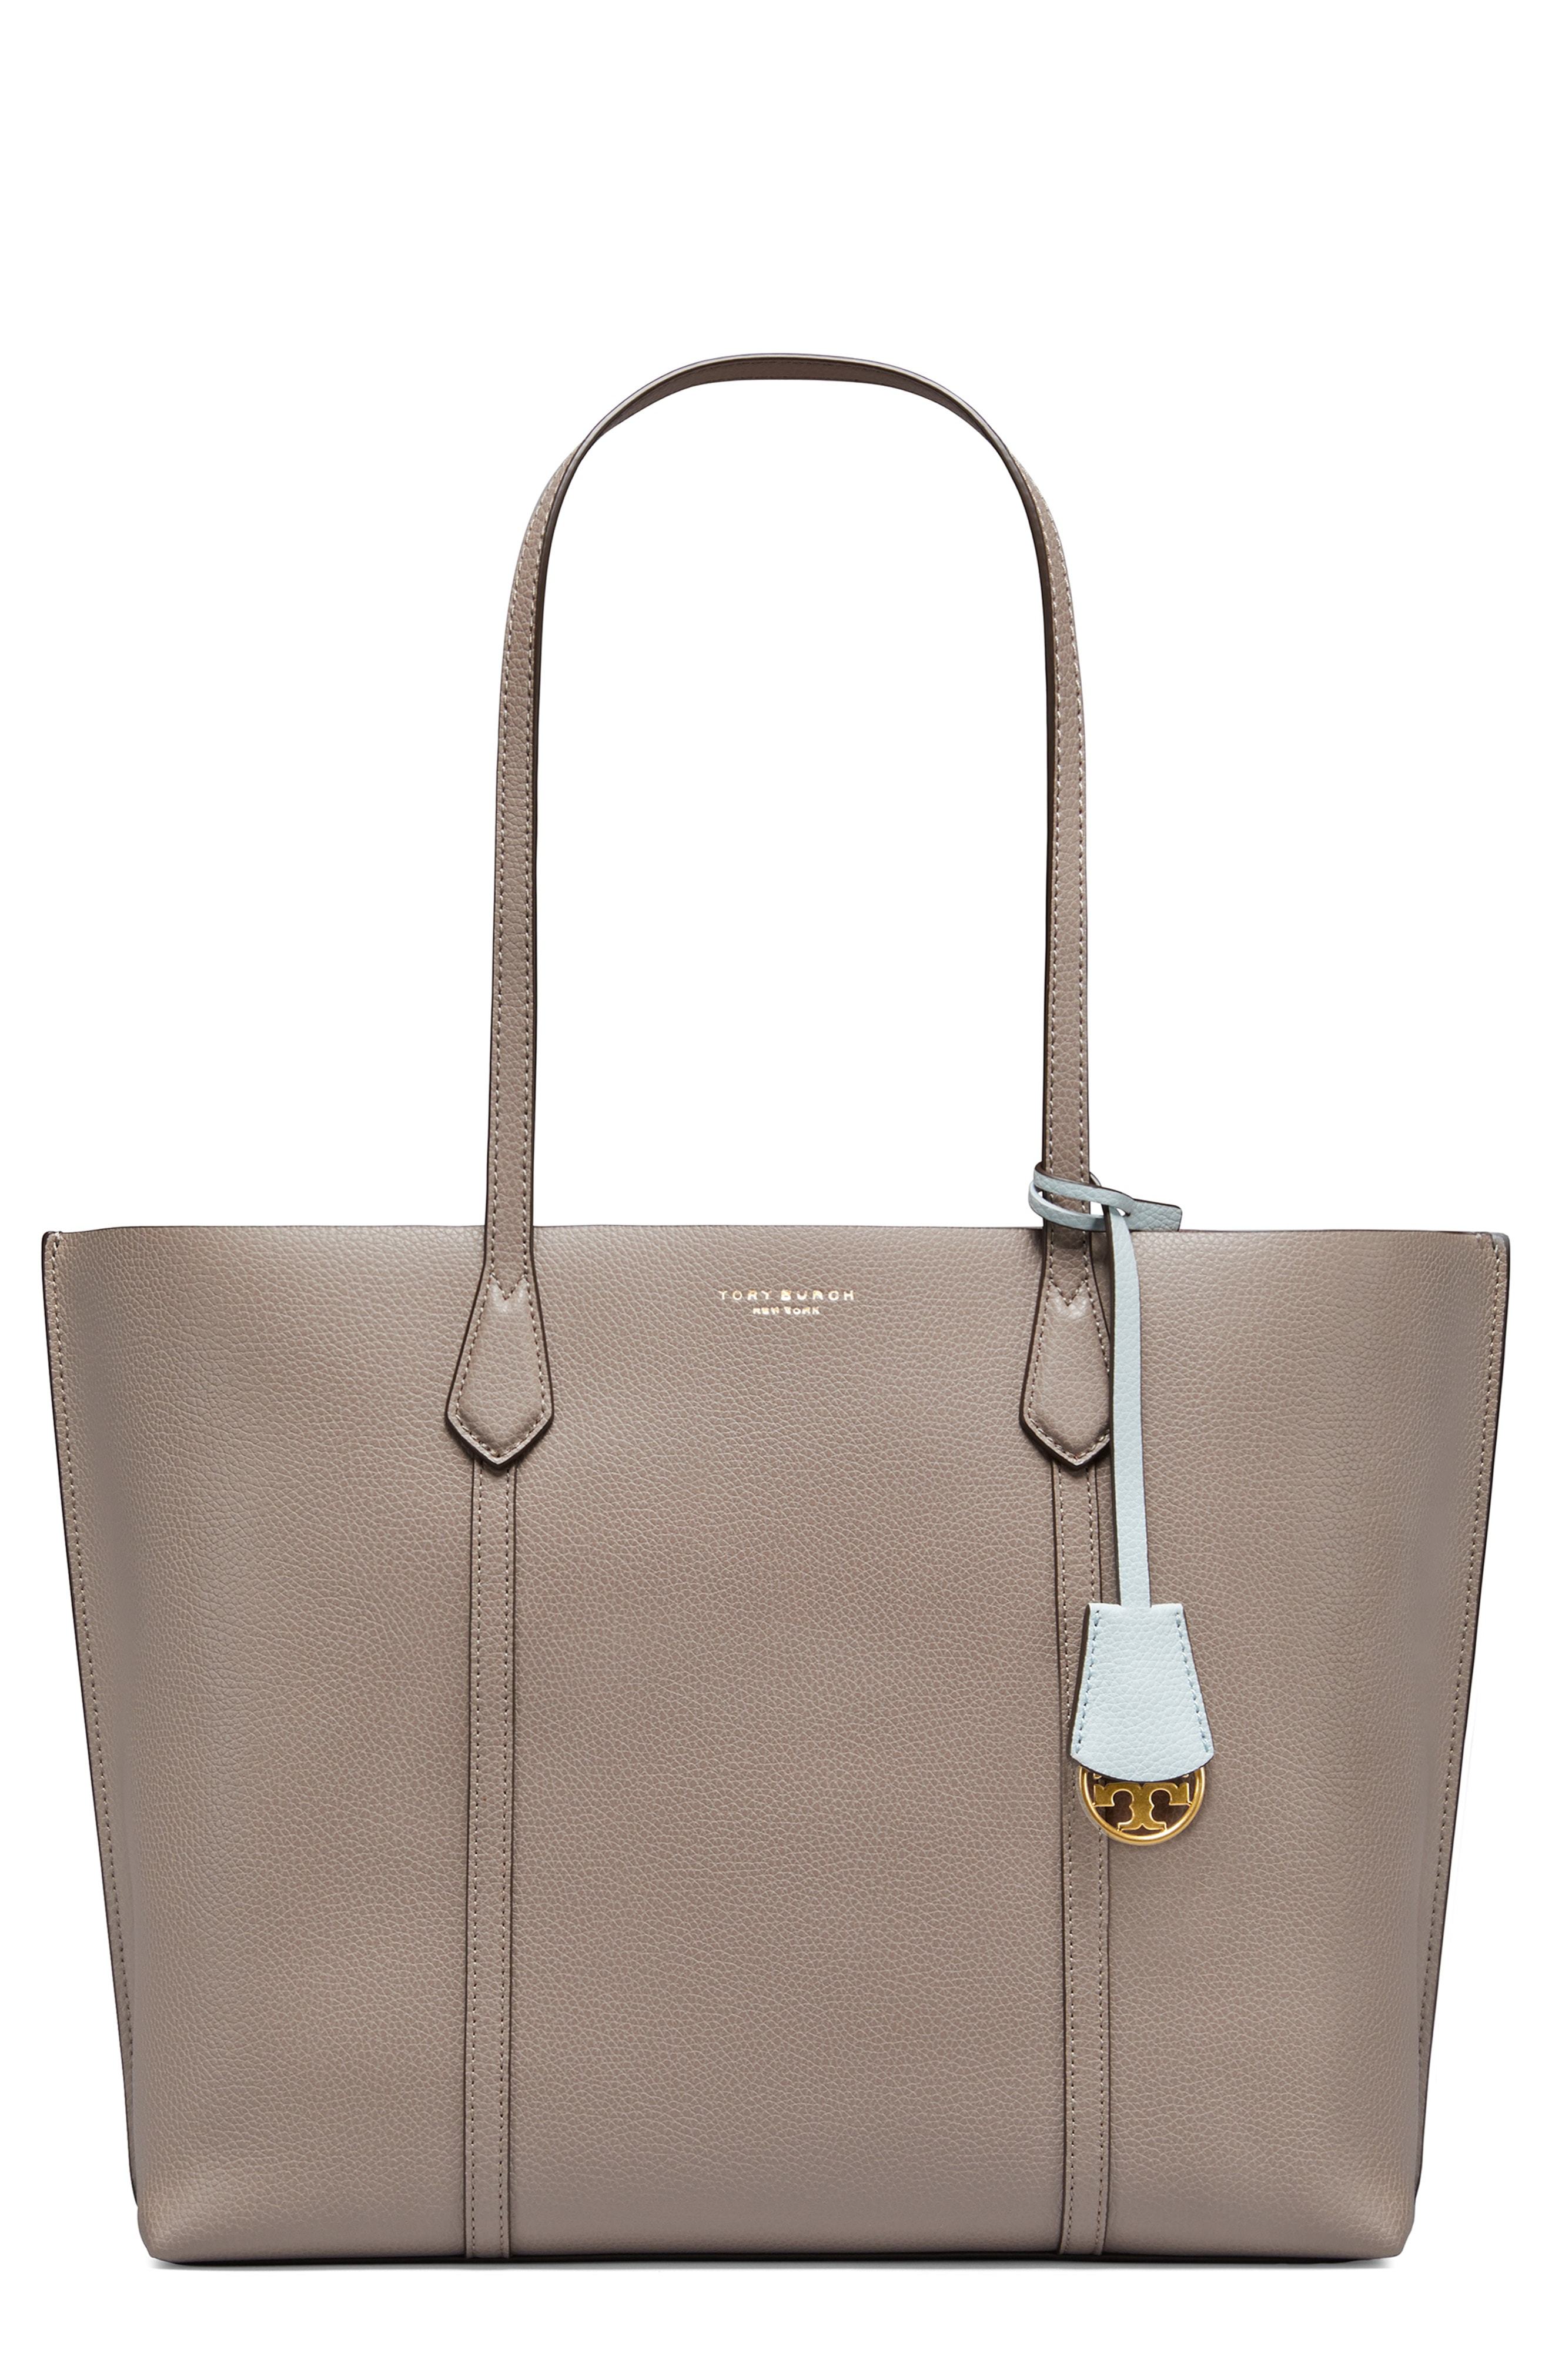 Tory Burch Perry Leather Tote, $348 | Nordstrom | Lookastic